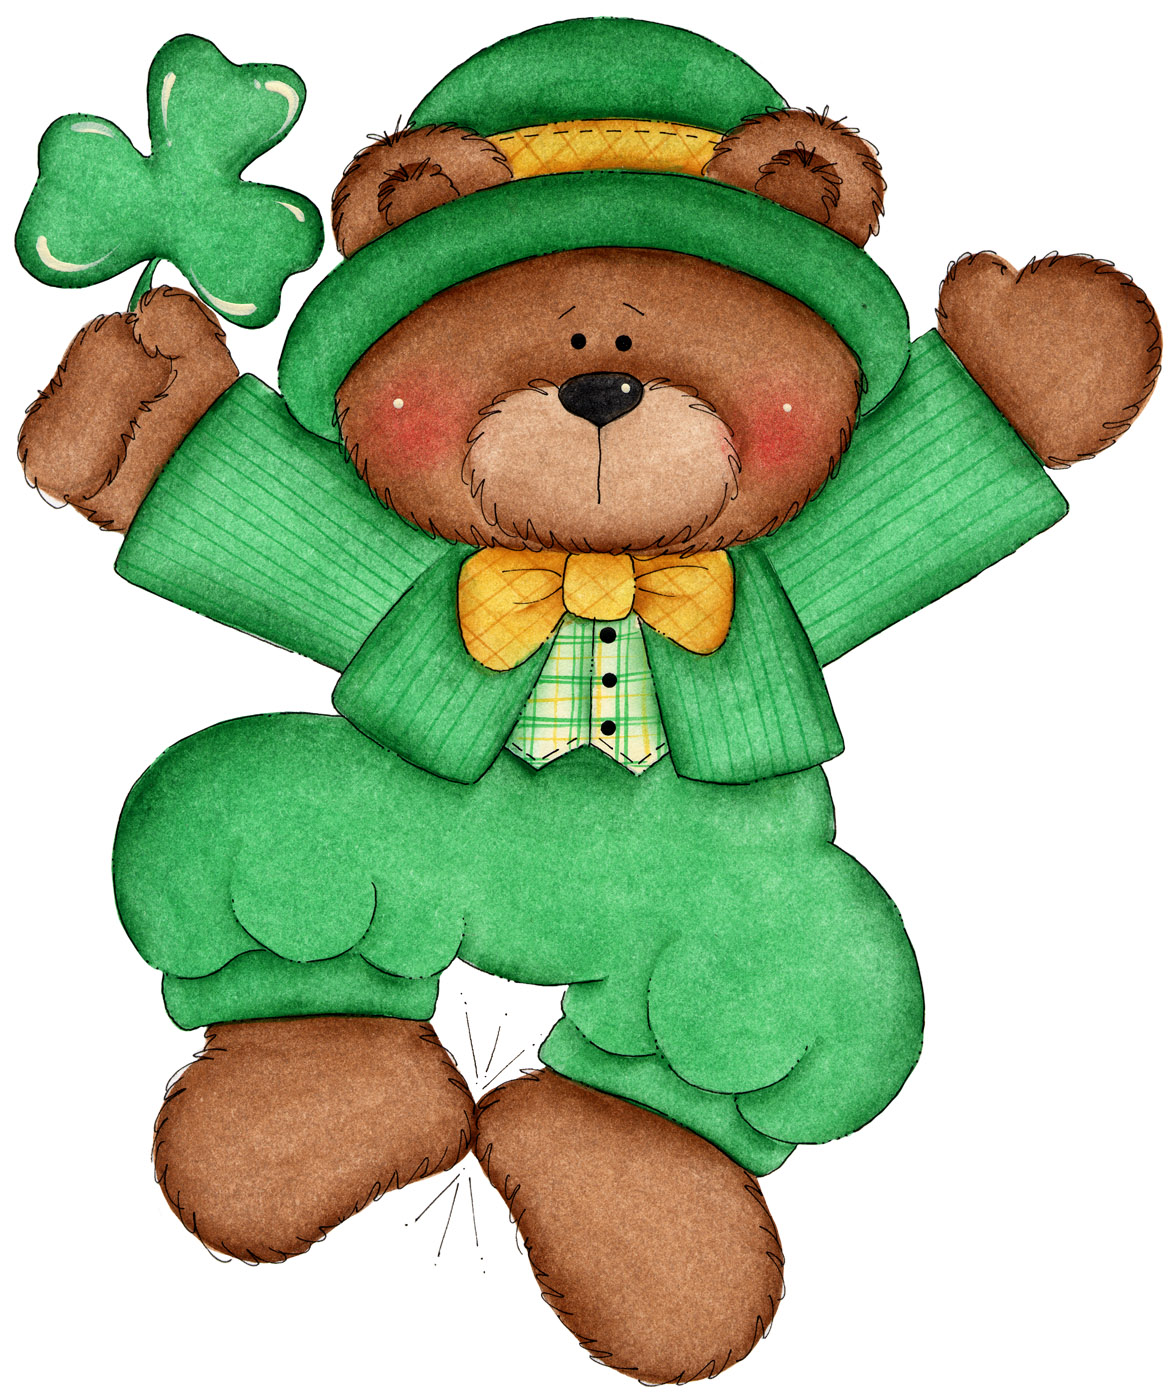 St. Patrick's Day Story-time | Ohio Township Newburgh Library